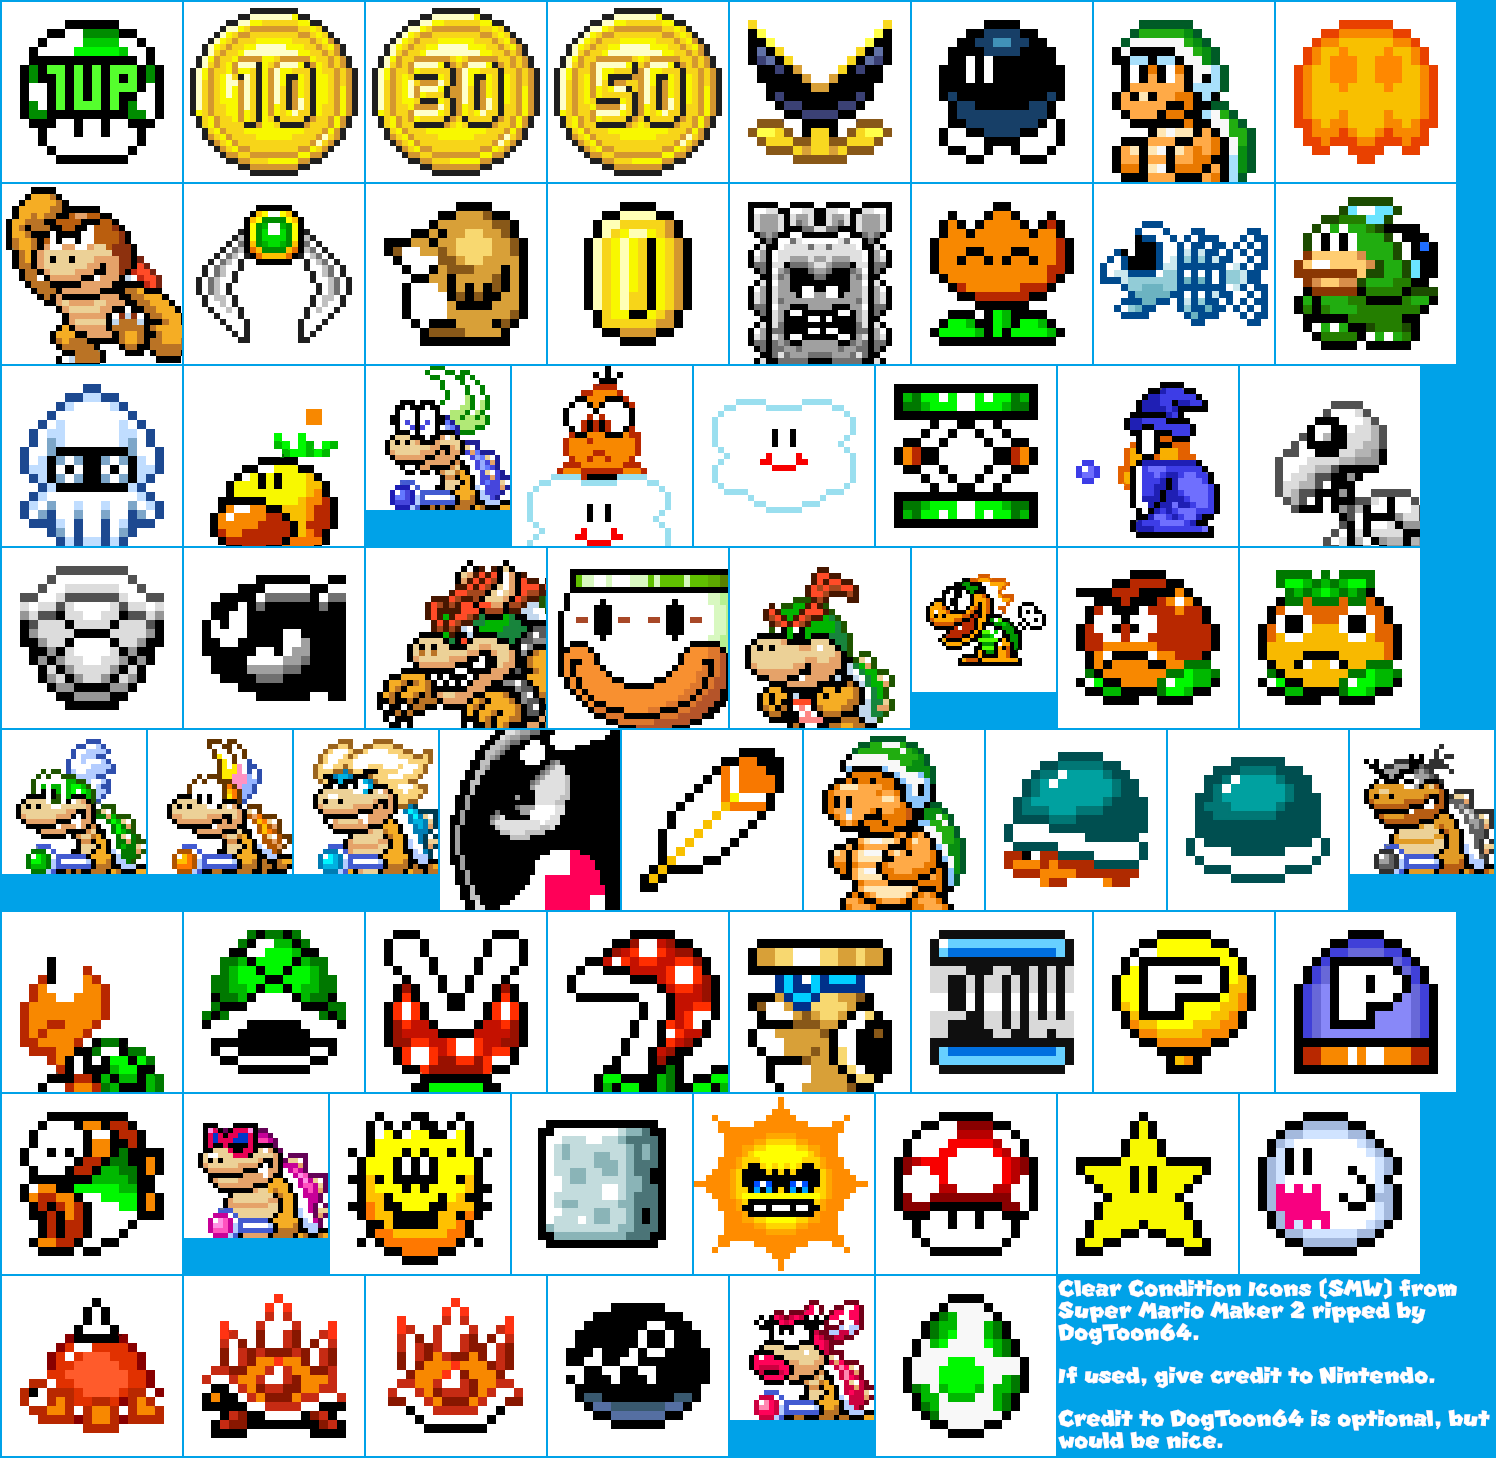 Clear Condition Icons (SMW)